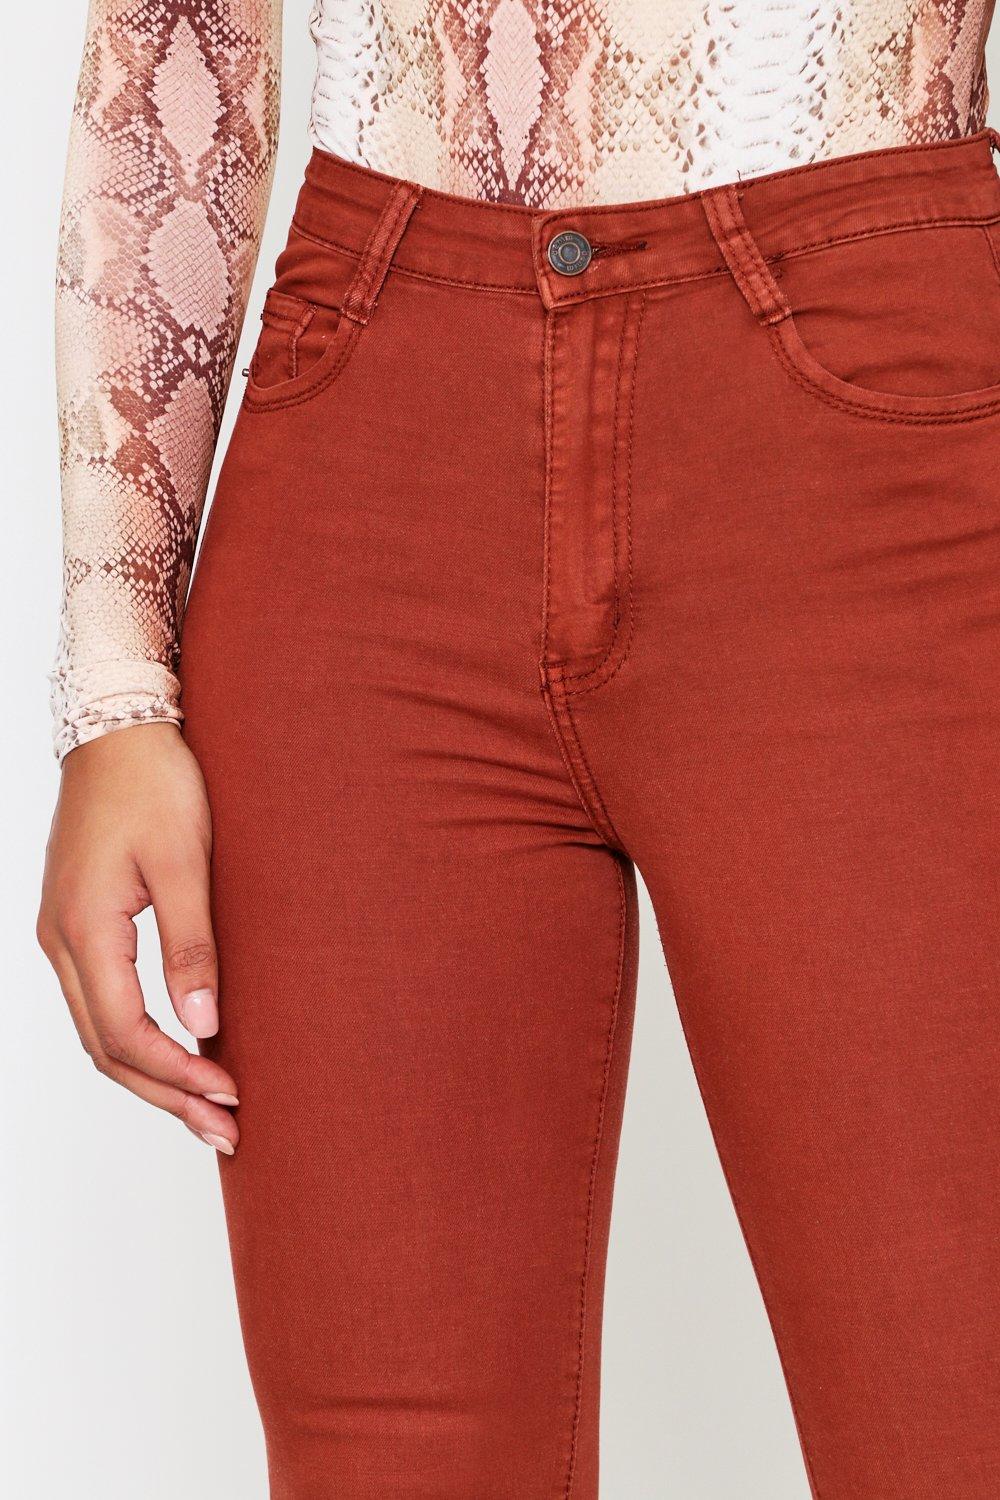 red high waisted skinny jeans